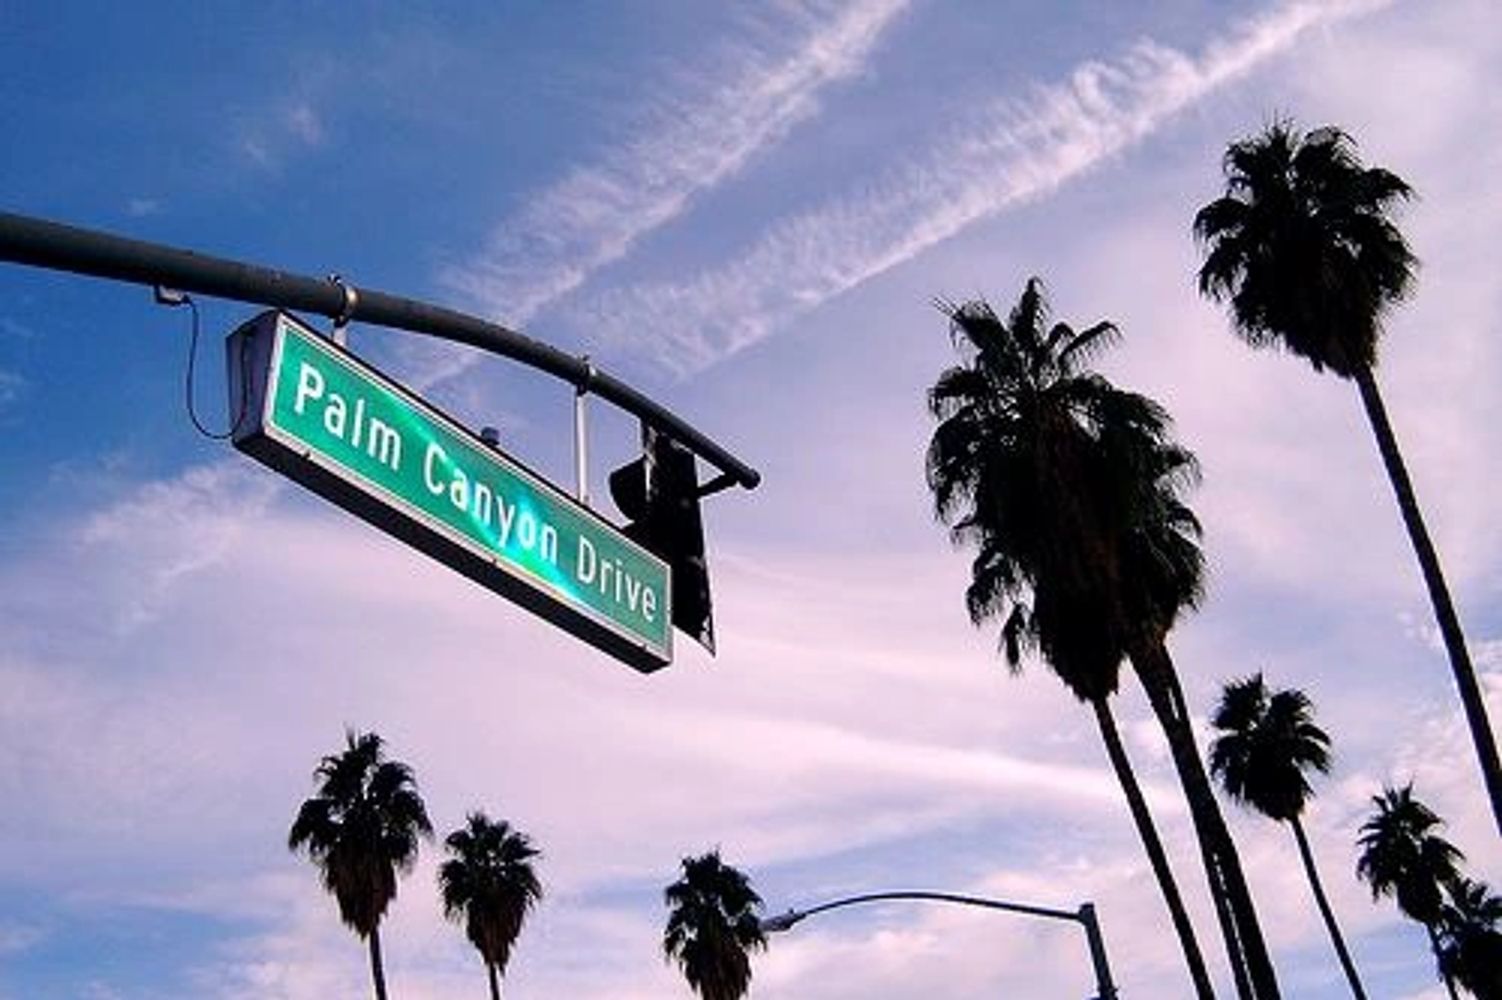 Palm Springs, Downtown - Palm Canyon Drive - Palm Springs, California